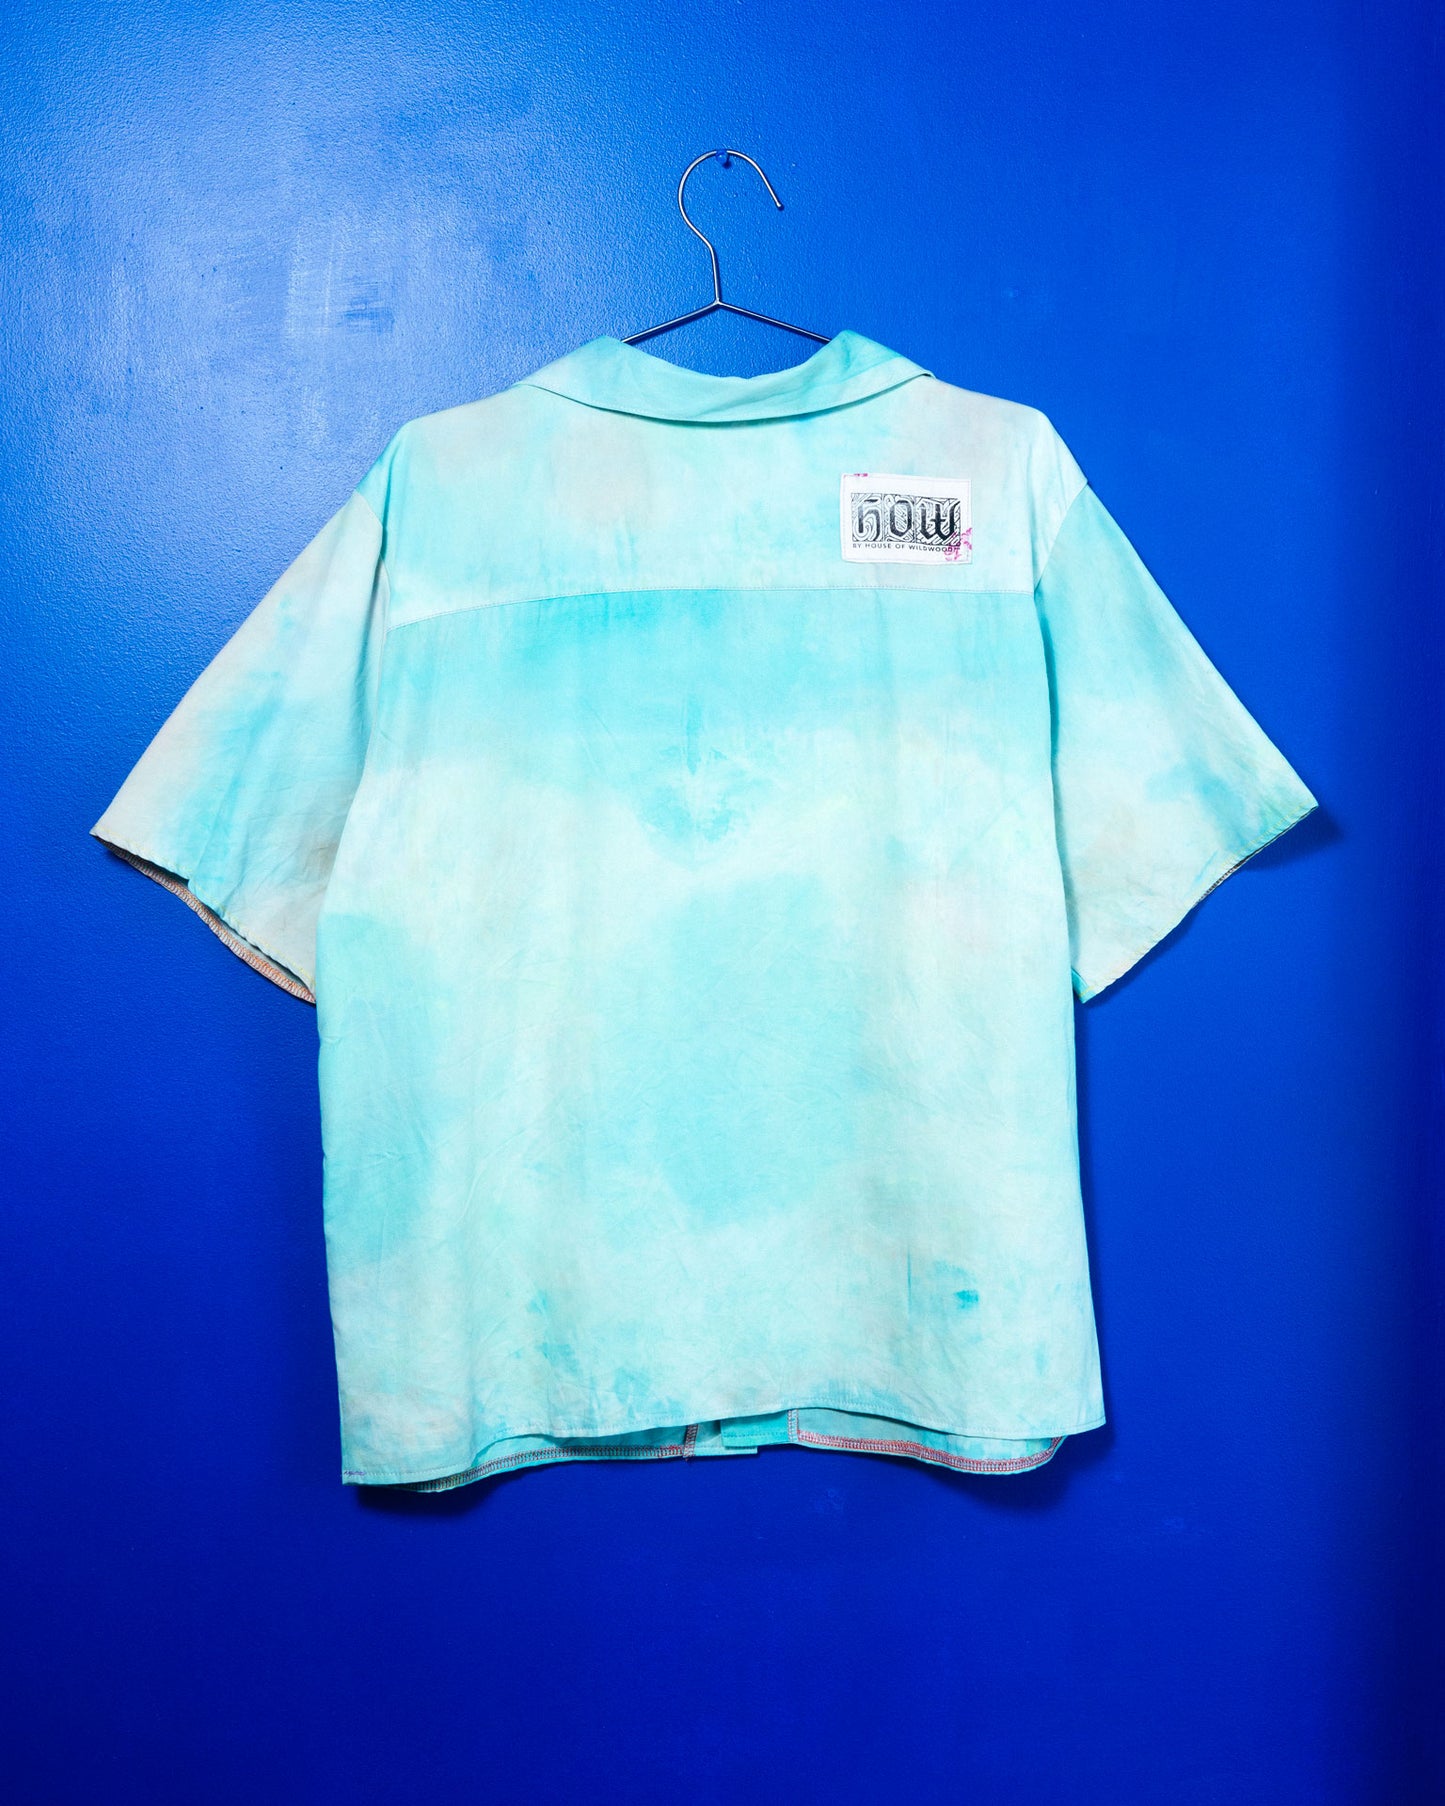 Abstract Sky Painted Unisex Cuban Shirt